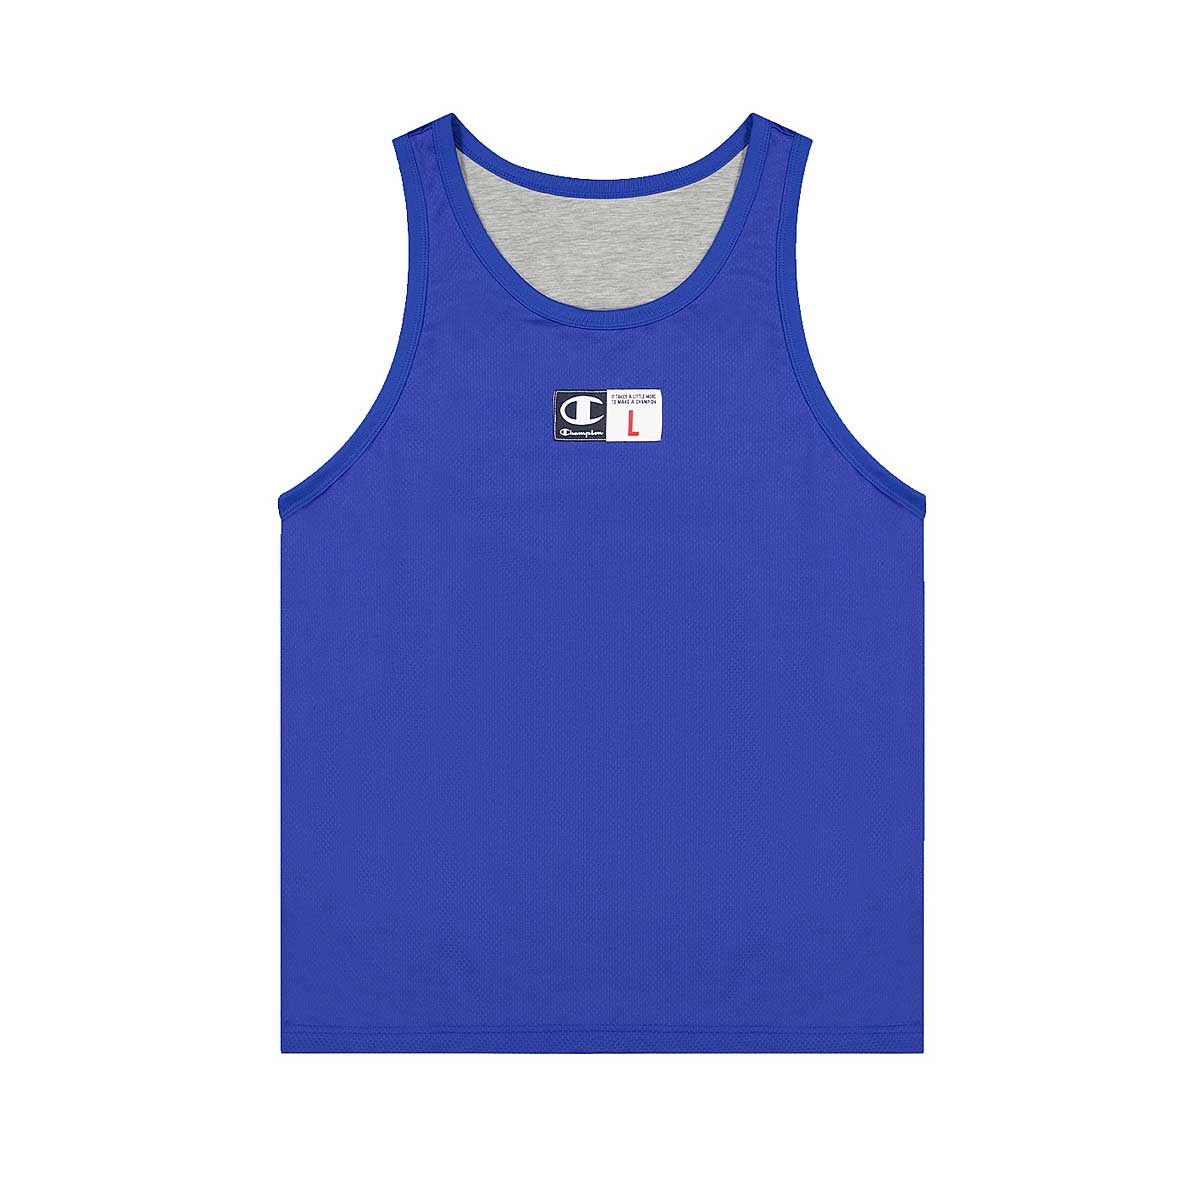 Champion Institutional Back To 90S Reversible Tank Top, Mazarine Blue